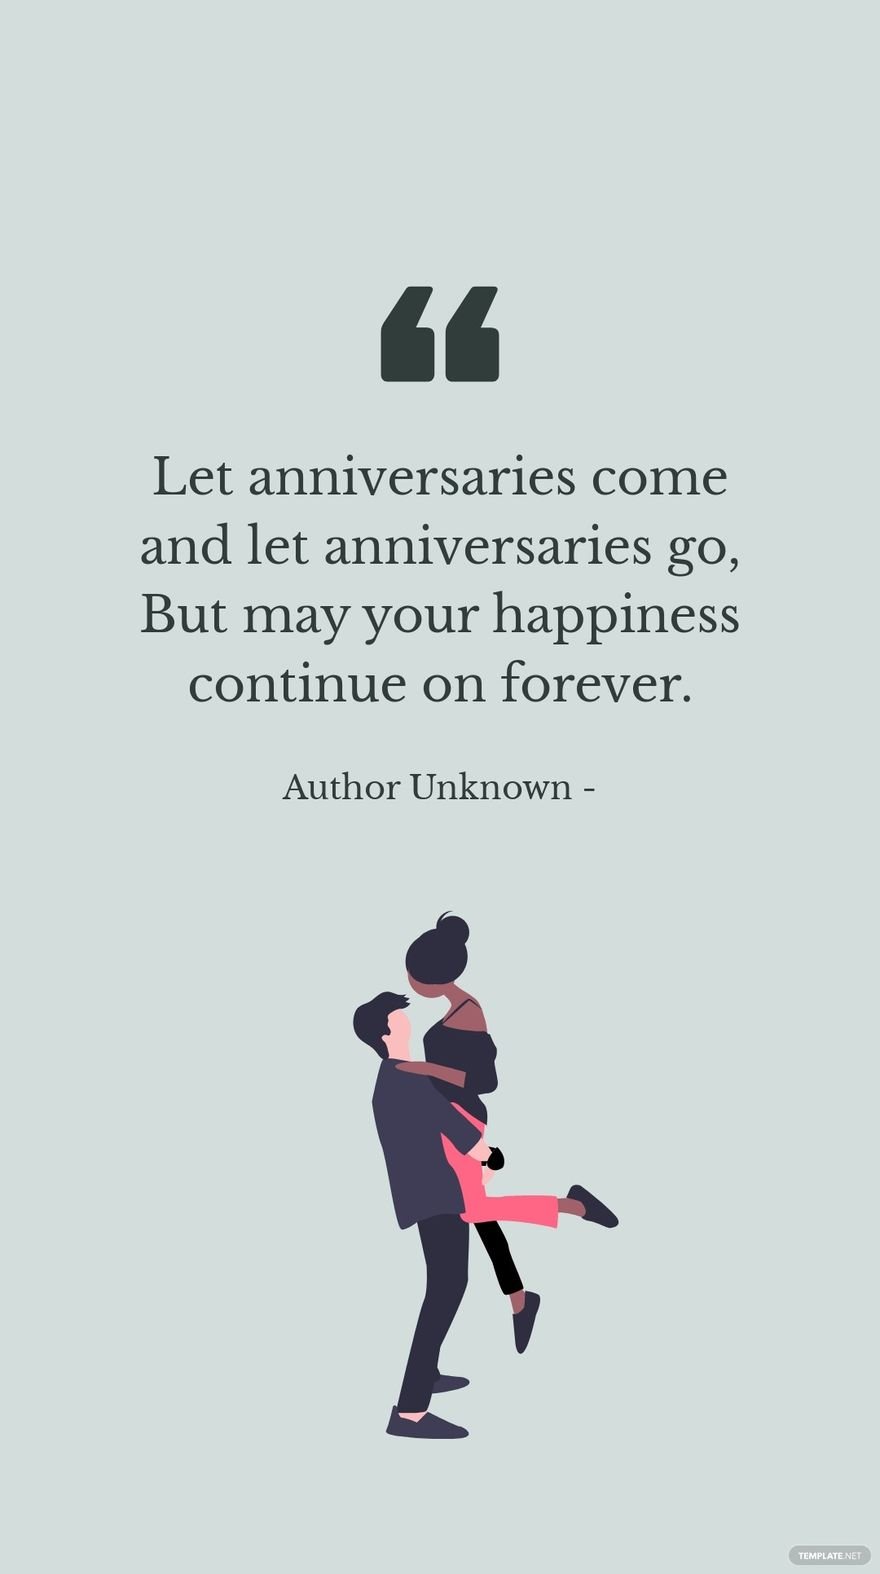 Free Author Unknown - Let anniversaries come and let anniversaries go, But may your happiness continue on forever. in JPG